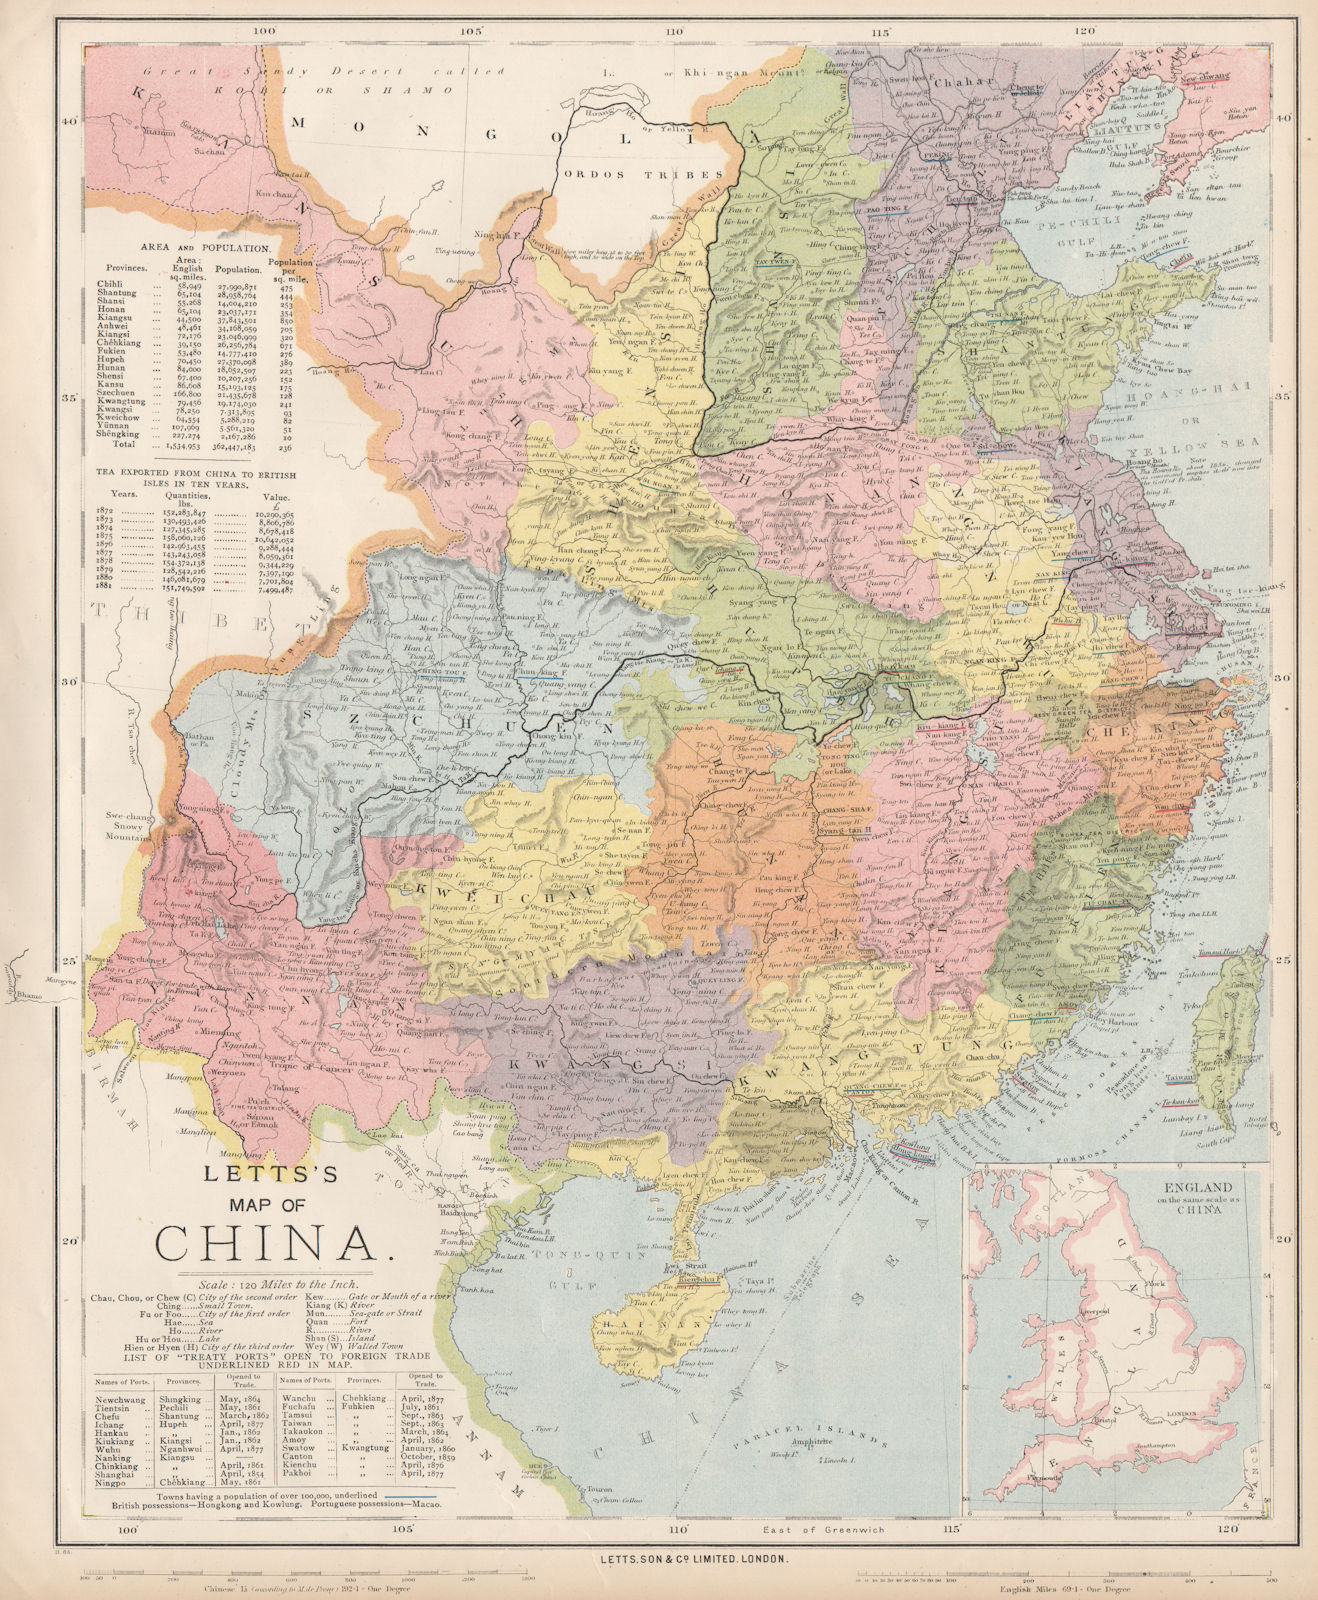 CHINA. Provinces, treaty ports, tea growing districts & exports. LETTS 1889 map